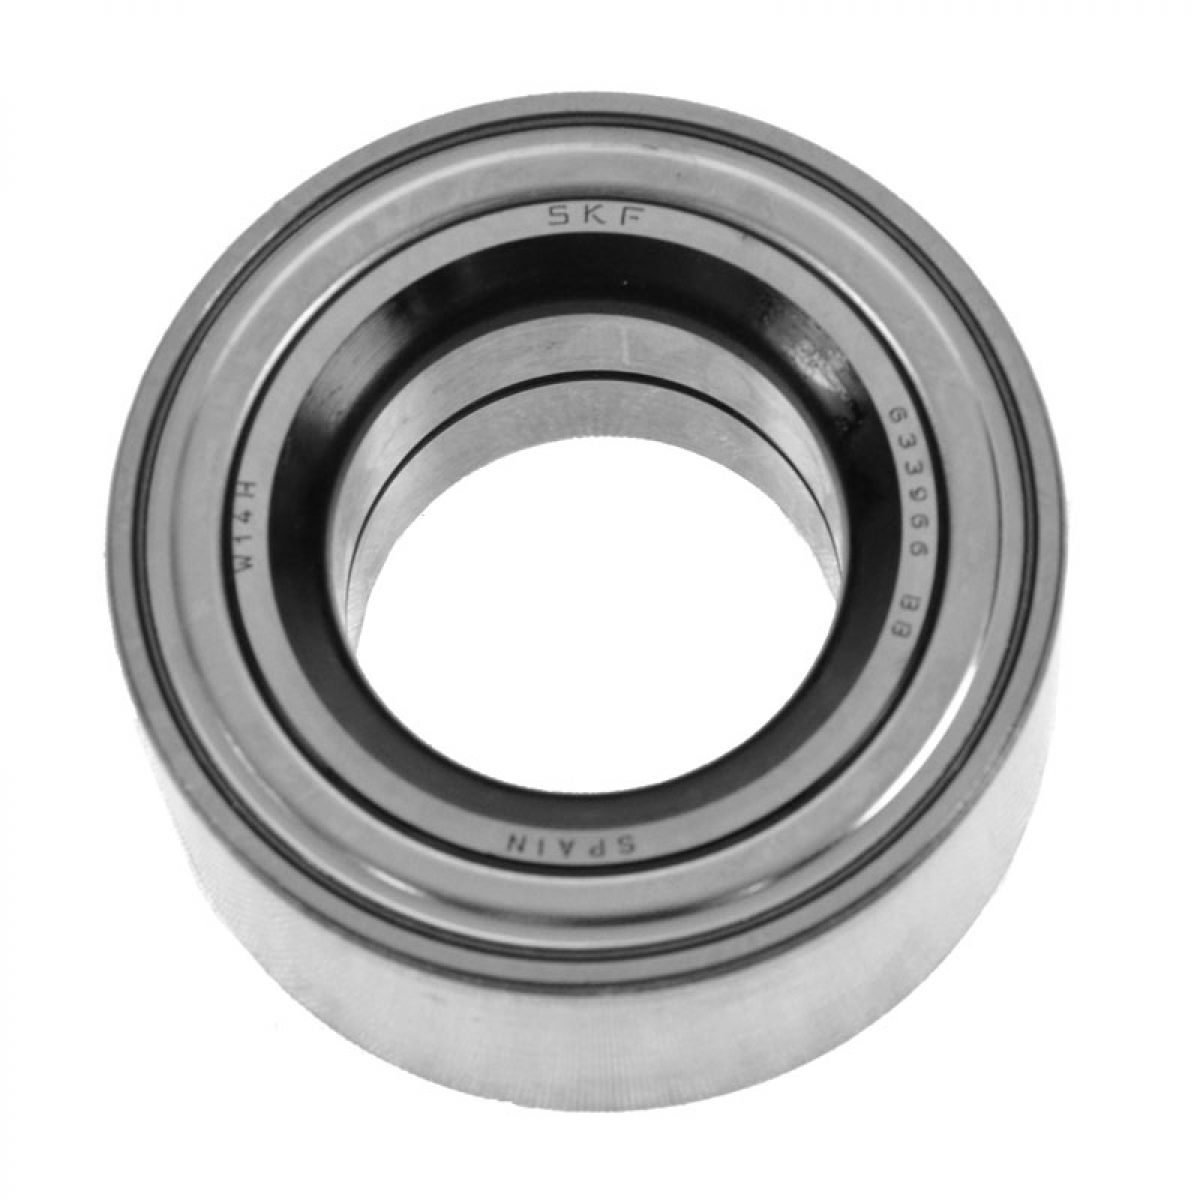 Ford contour front wheel bearing #7